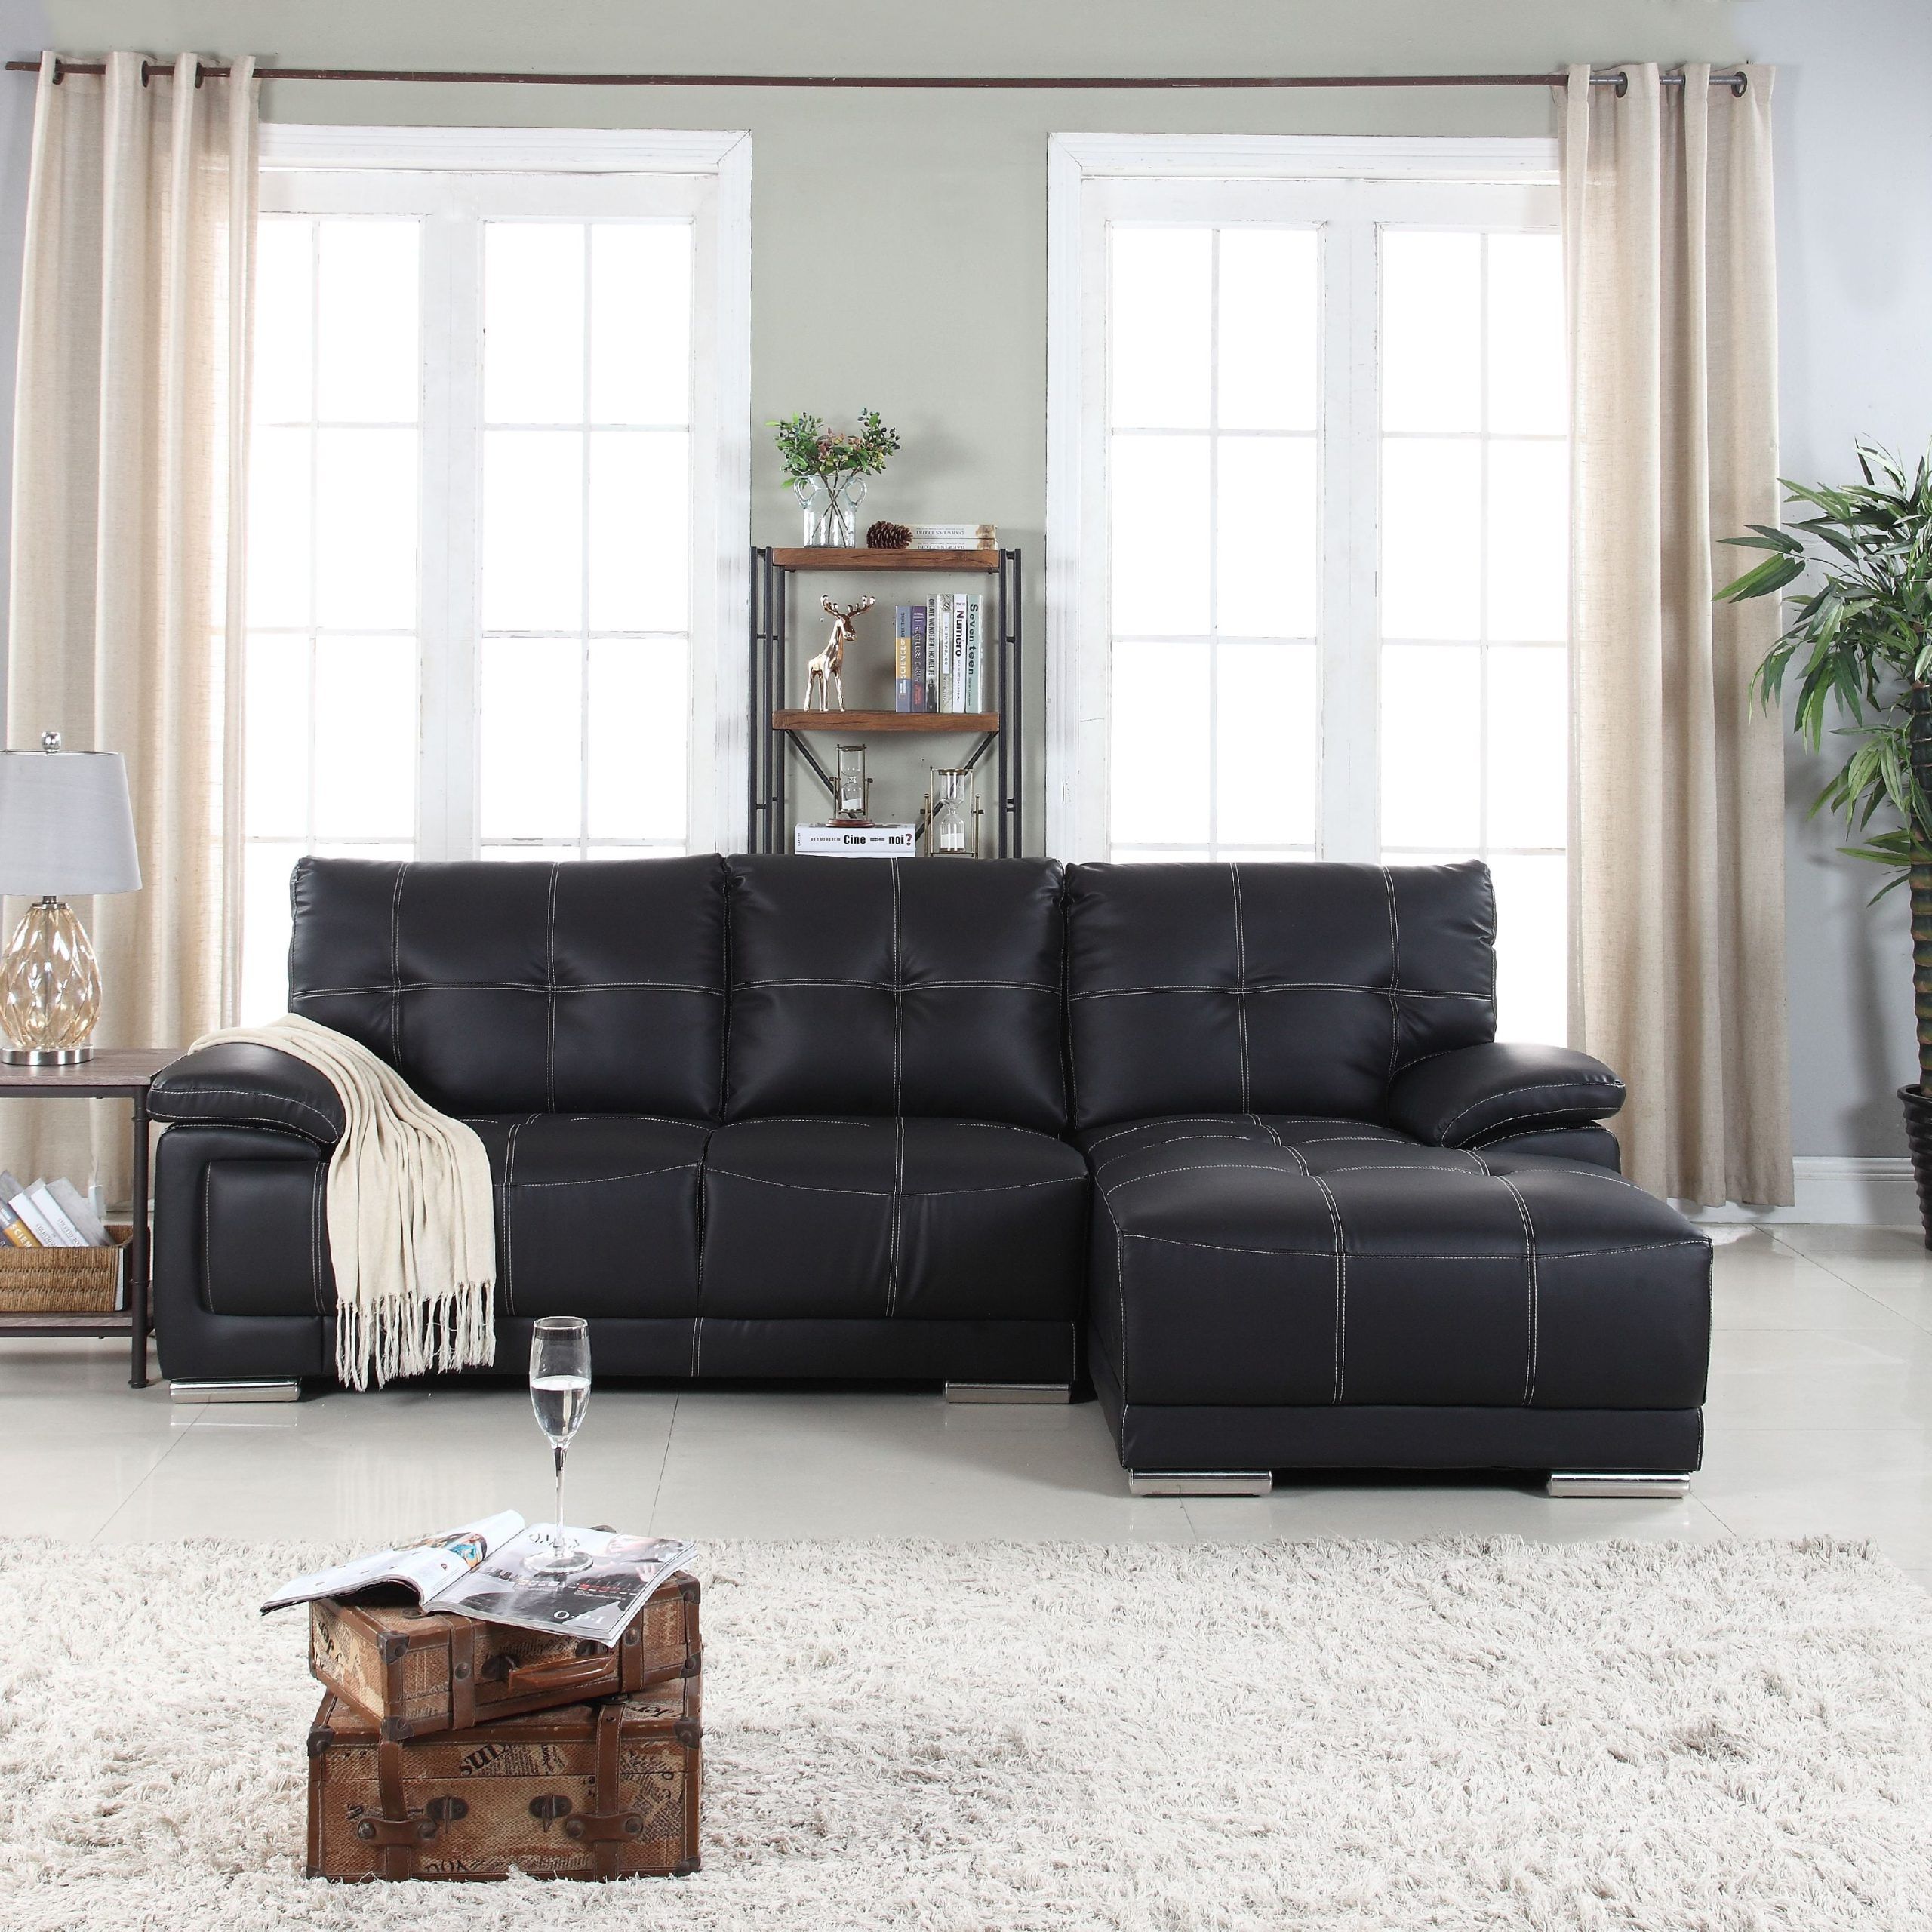 Classic Tufted Faux Leather Sectional Sofa – Walmart Intended For Faux Leather Sofas In Dark Brown (Gallery 19 of 20)